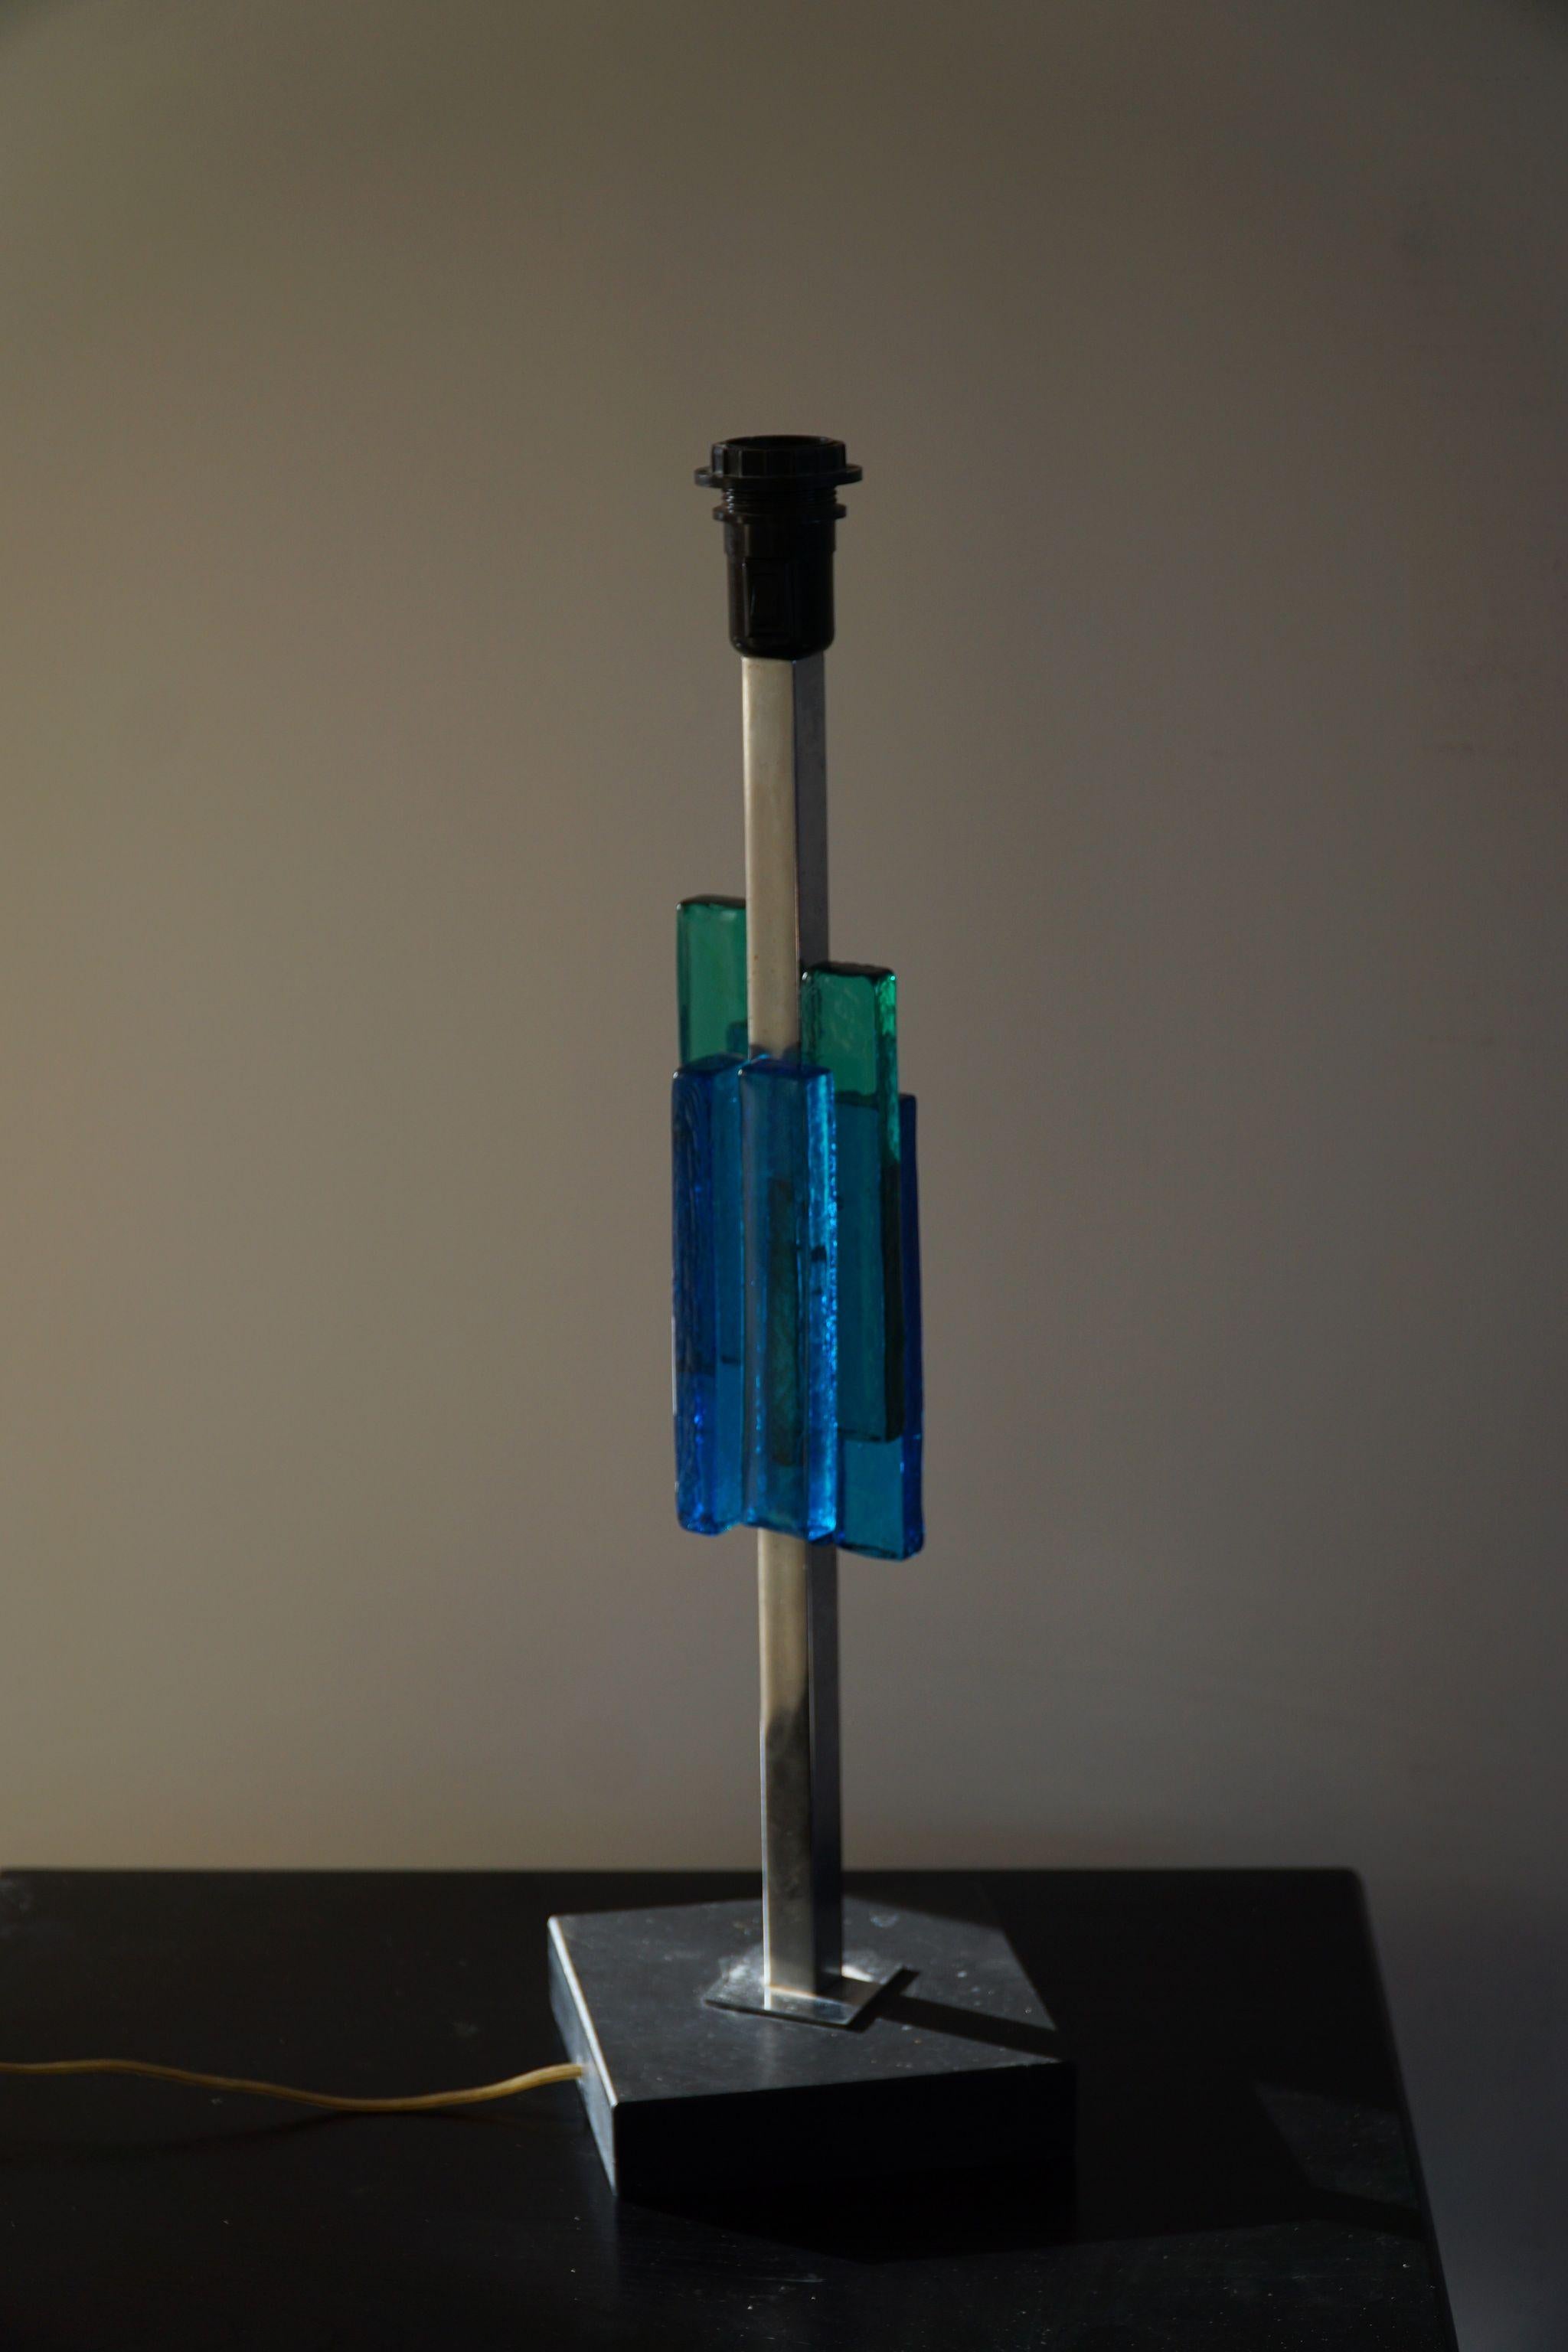 Svend Aage Holm Sørensen Table Lamp, Metal & Glass, Danish Modern Design, 1960s In Good Condition For Sale In Odense, DK